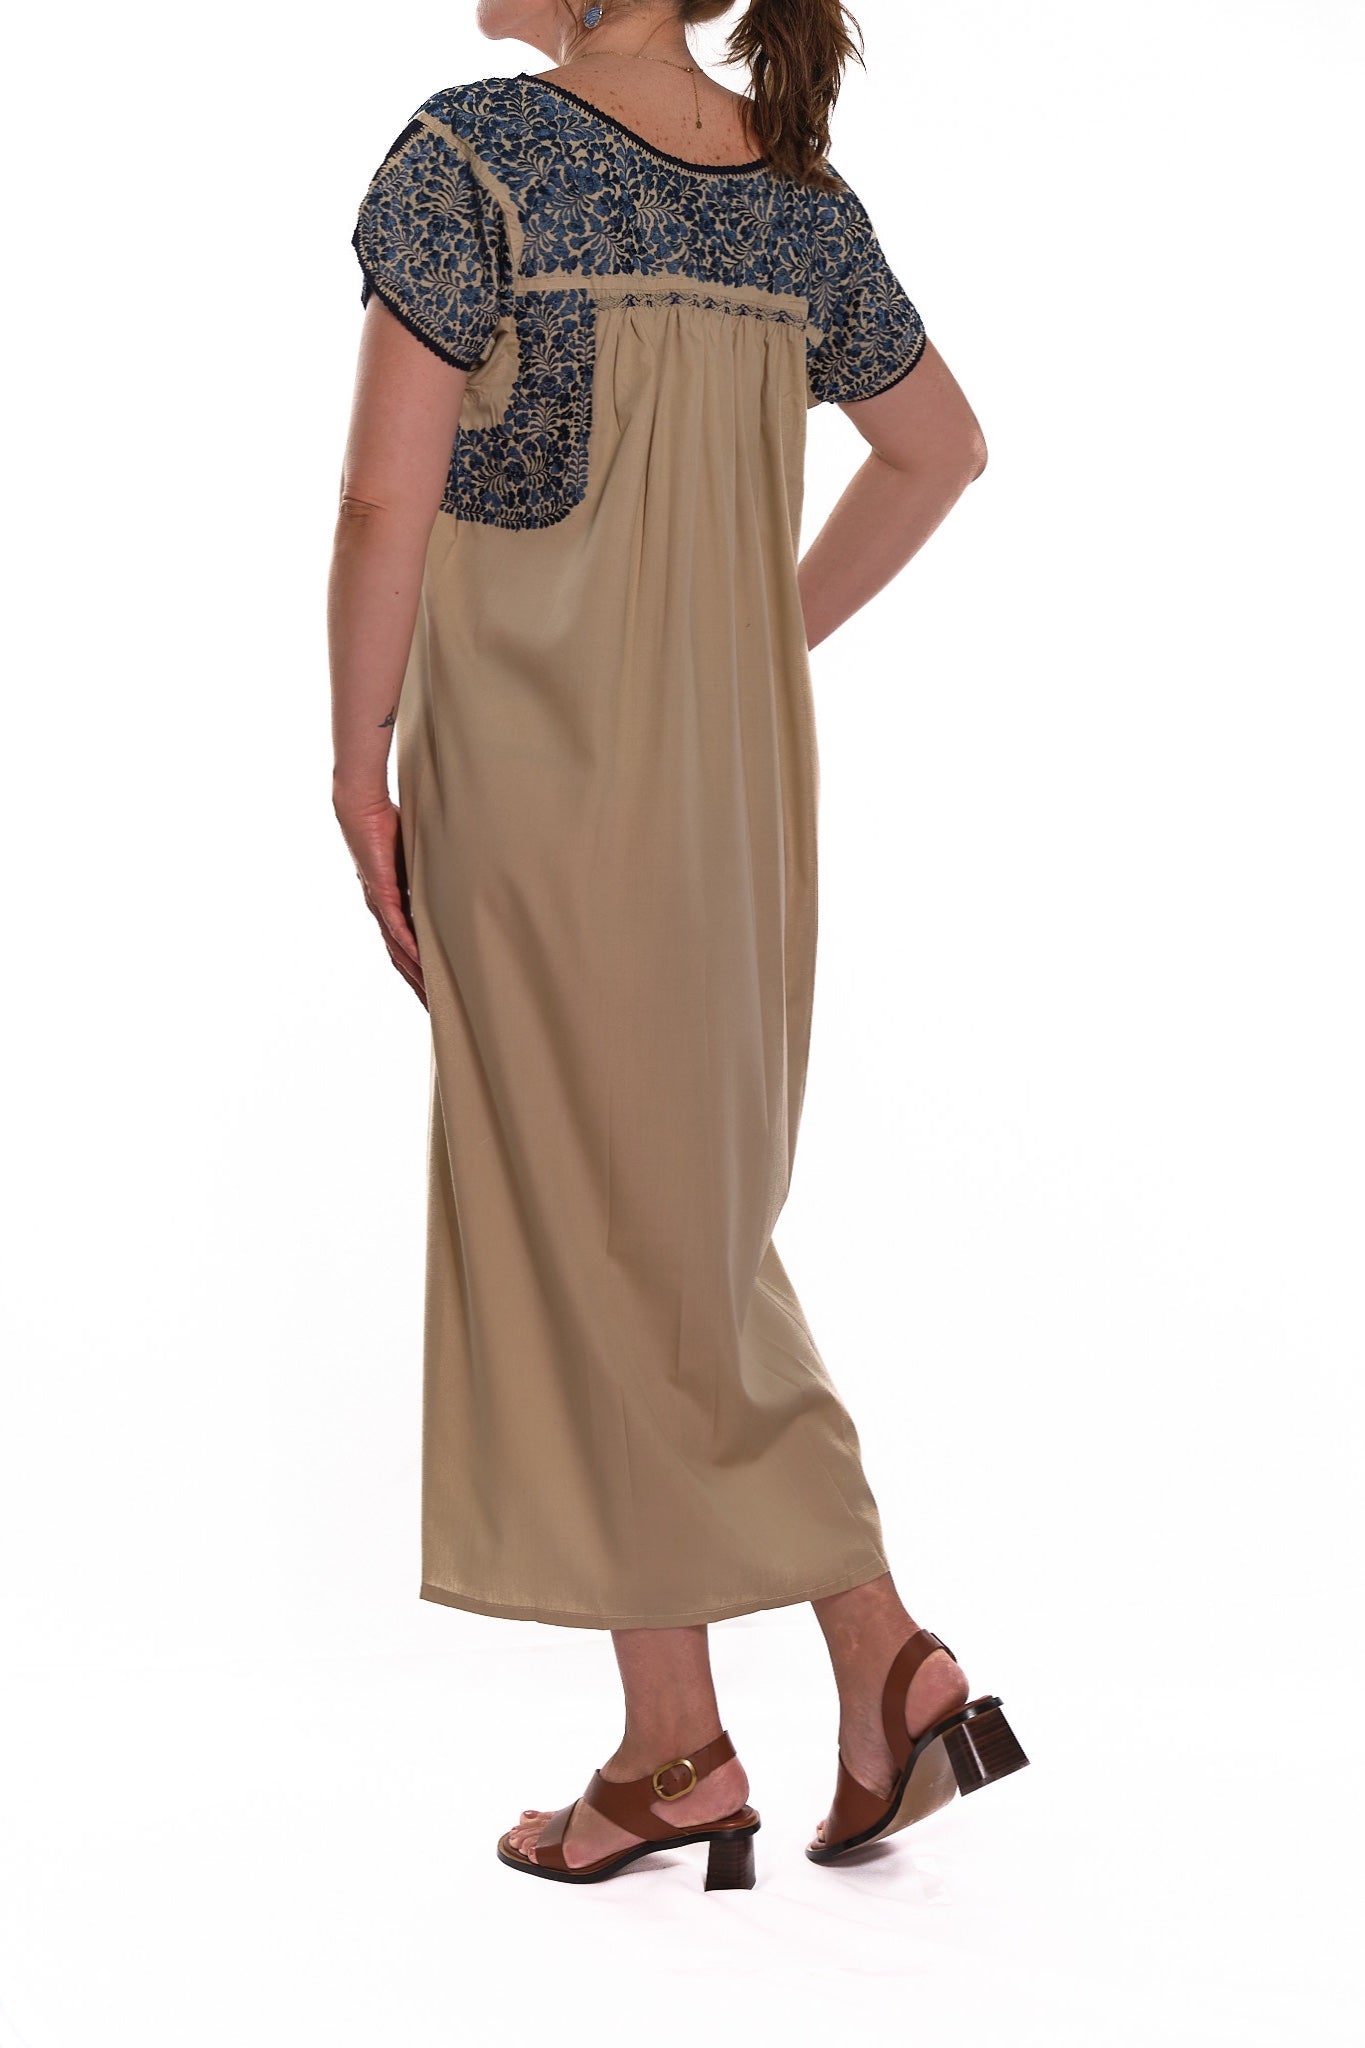 San Antonino Dress beige with blue embroidery